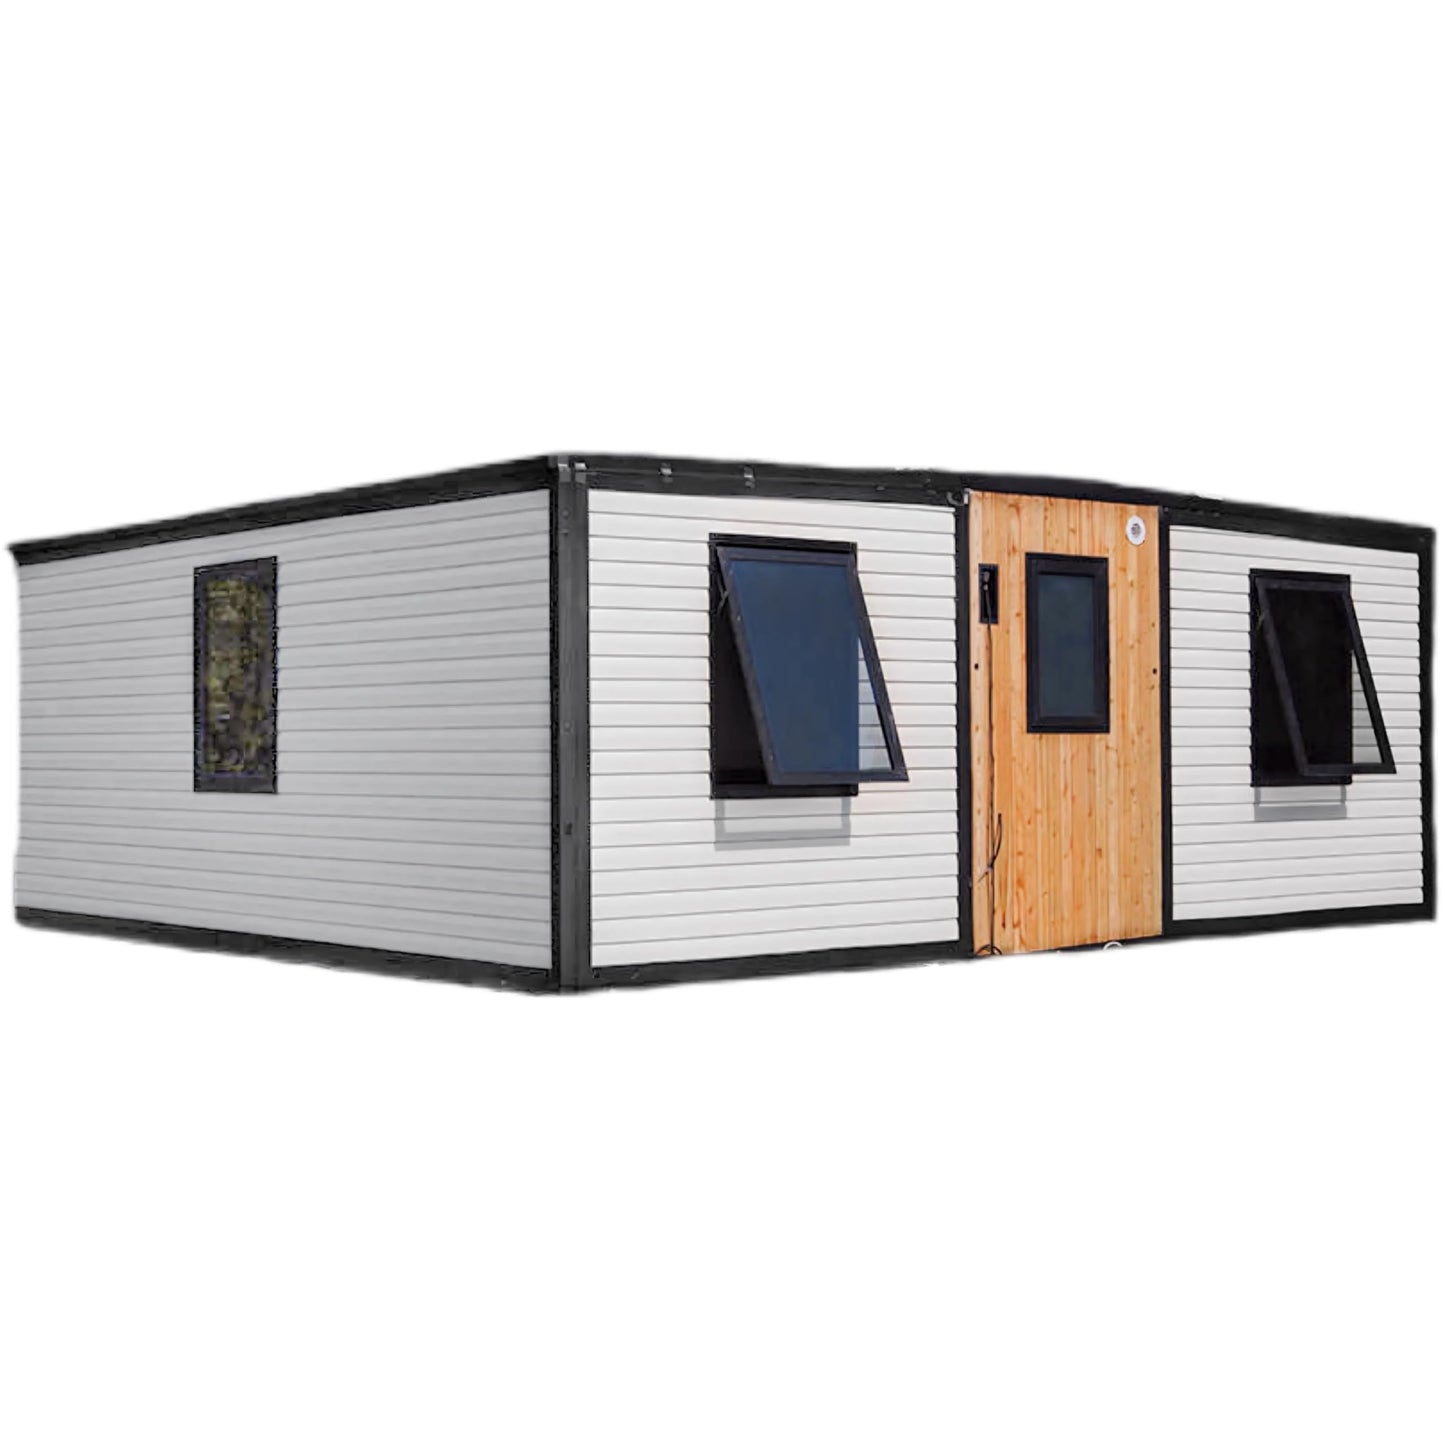 Patented Modern Eco-Friendly, Expandable Prefab House, Single-Story, Permanent House, Steel Storage, Foldable Tiny Home with Amenities, House to Live in 22 x 20 FT (Approx. 429 SQ FT / 39m2)